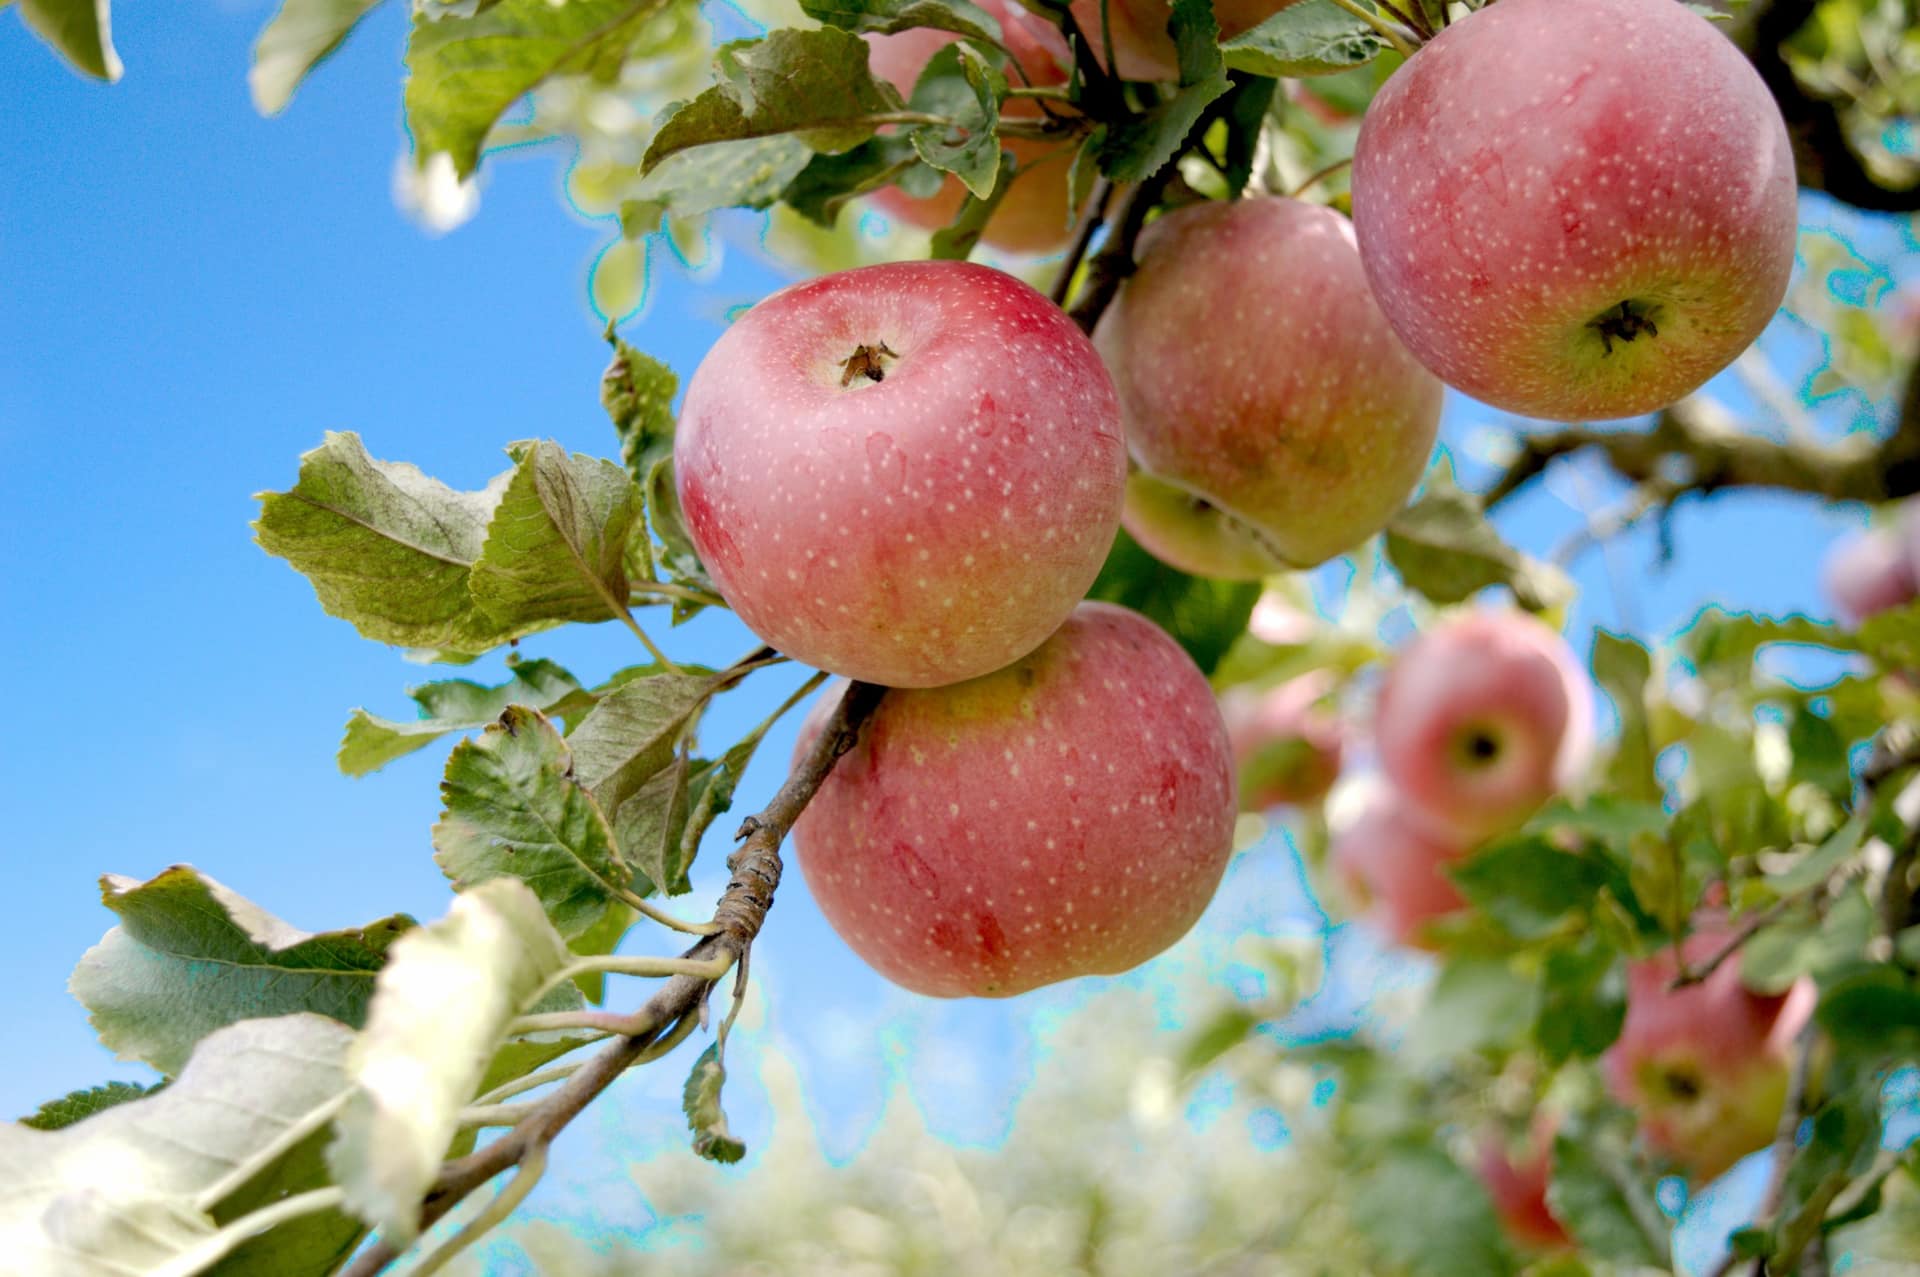 Featured image for “Precocity (Apples) 10 Earliest to Bear Apples to Pick”